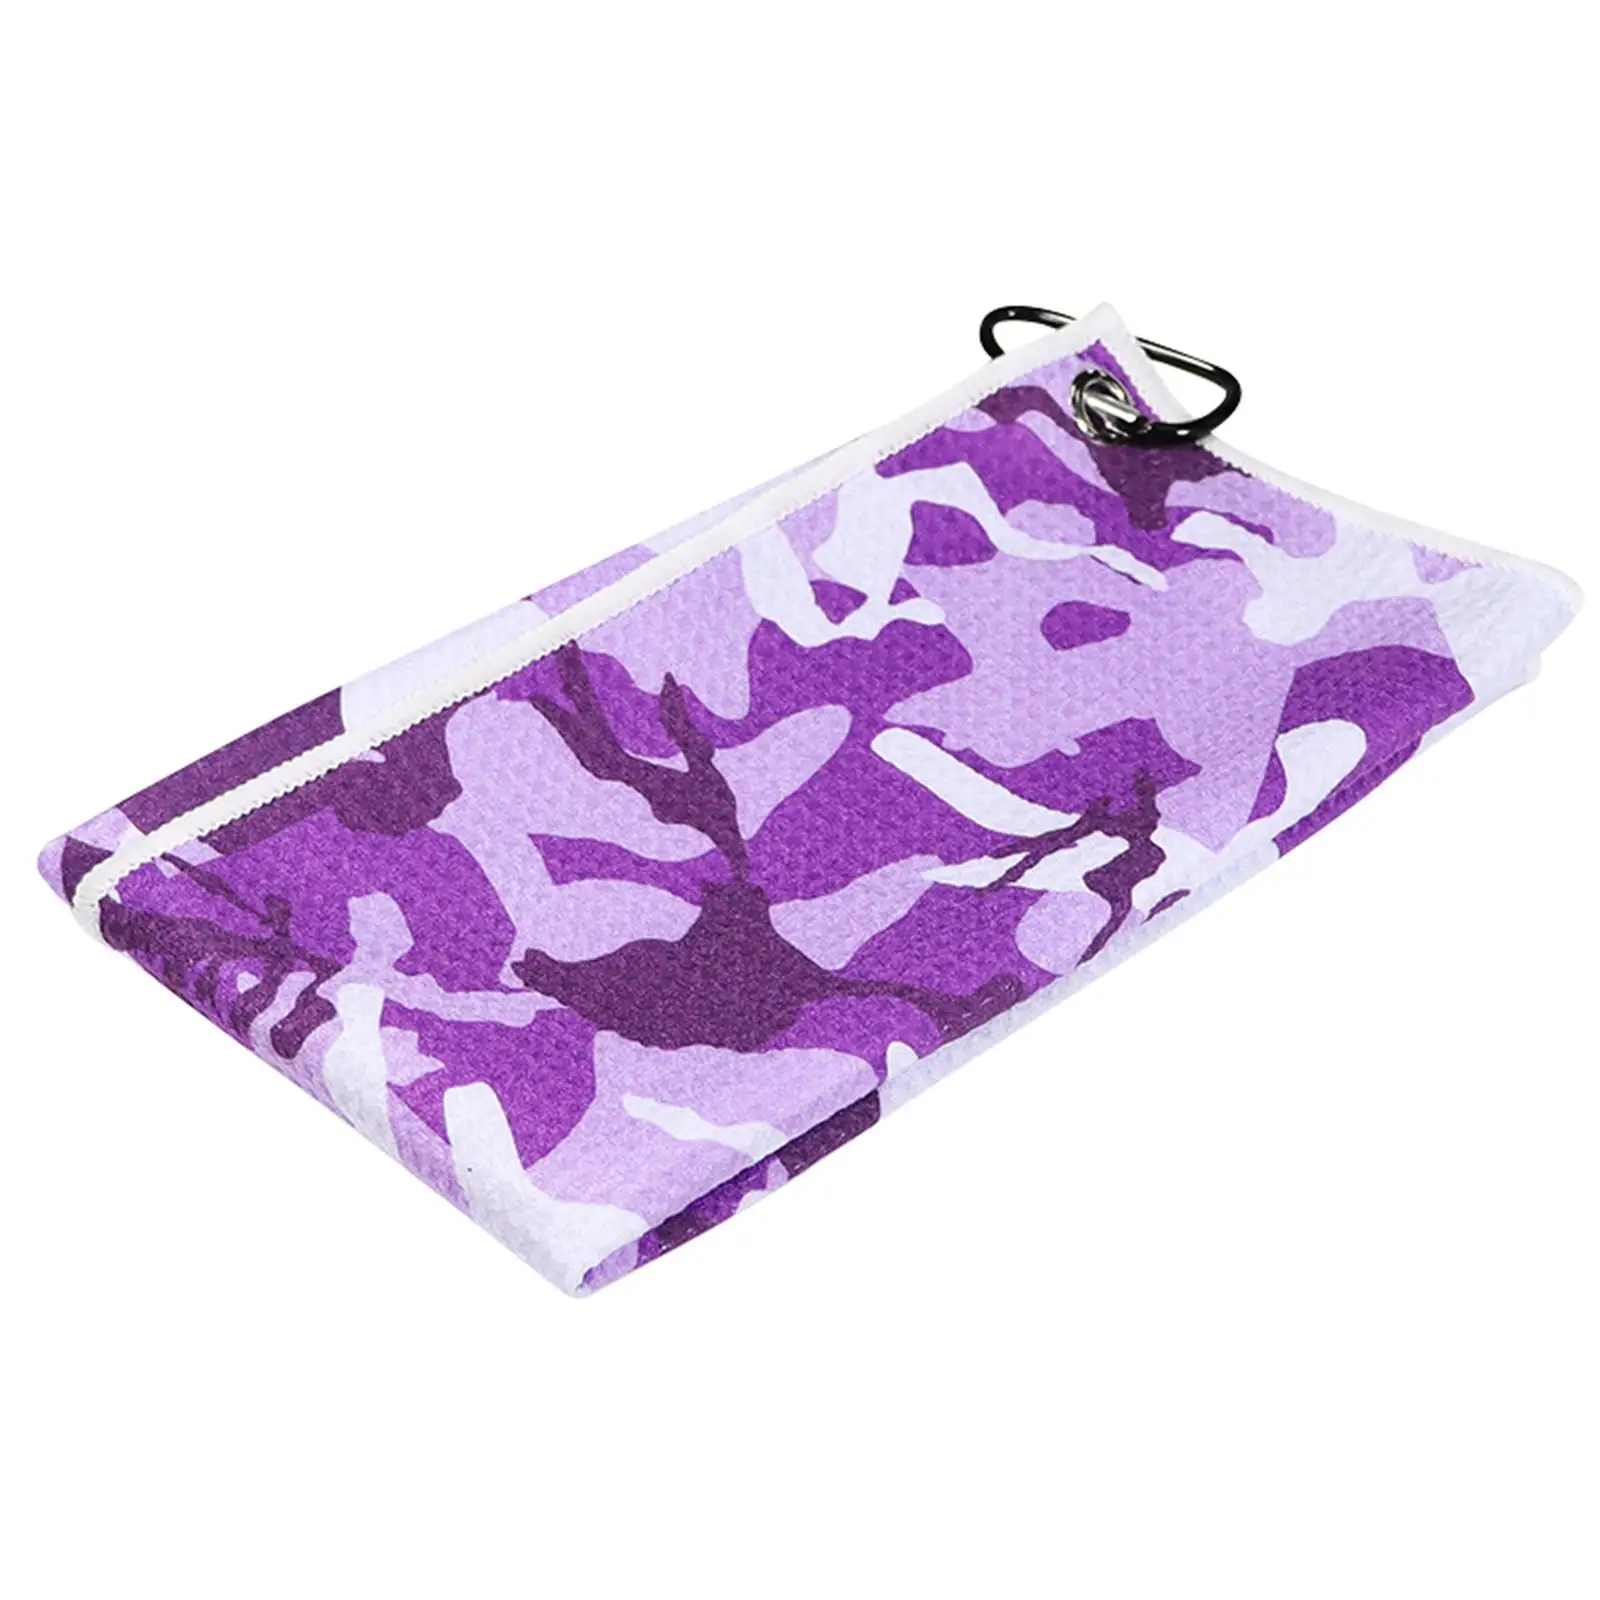 Camo Golf Towel for Golf Bag with Clip Waffle Pattern Cleaning Towels Super